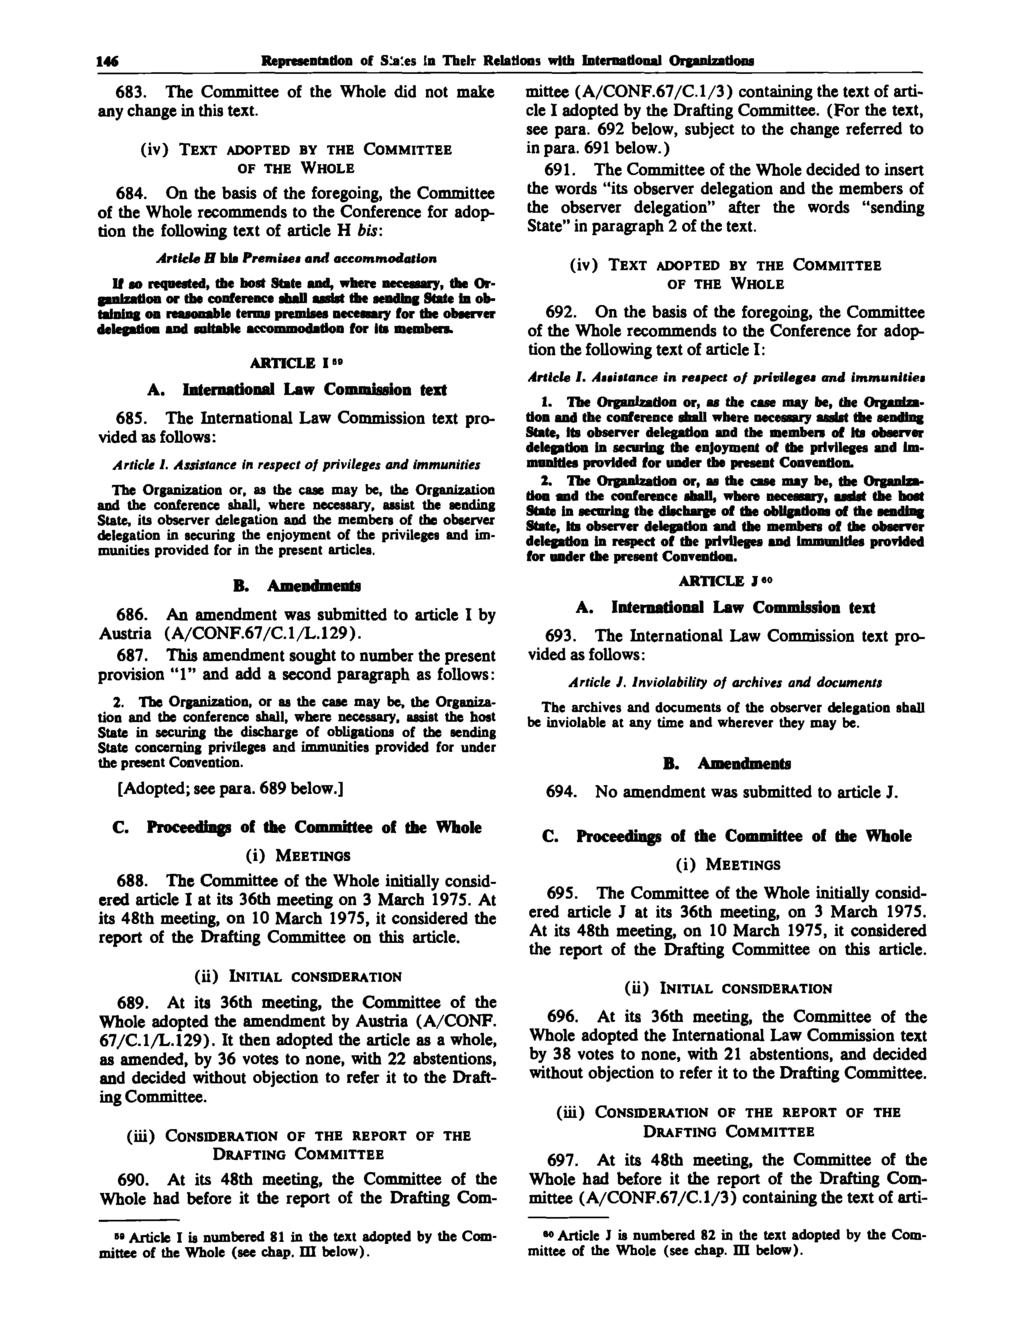 146 Representation of Suites In Their Relations with International Organizations 683. The Committee of the Whole did not make any change in this text.